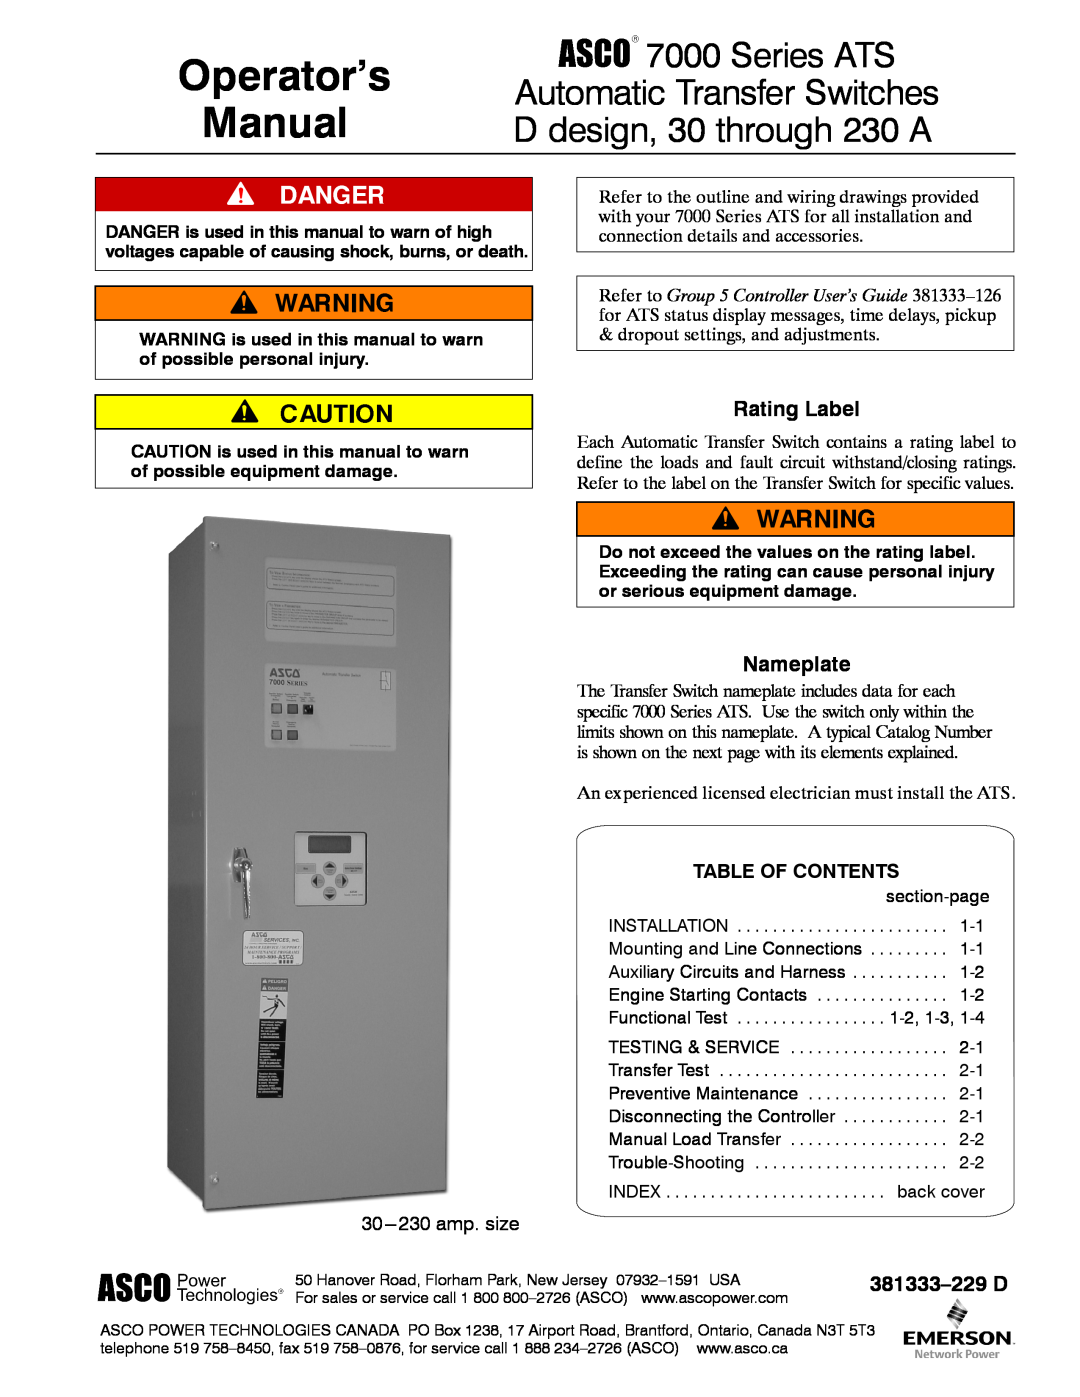 Emerson 7000 manual Danger, Table of Contents, Nameplate and Rating Label, Operator’s, Manual, Series Medium-Voltage 